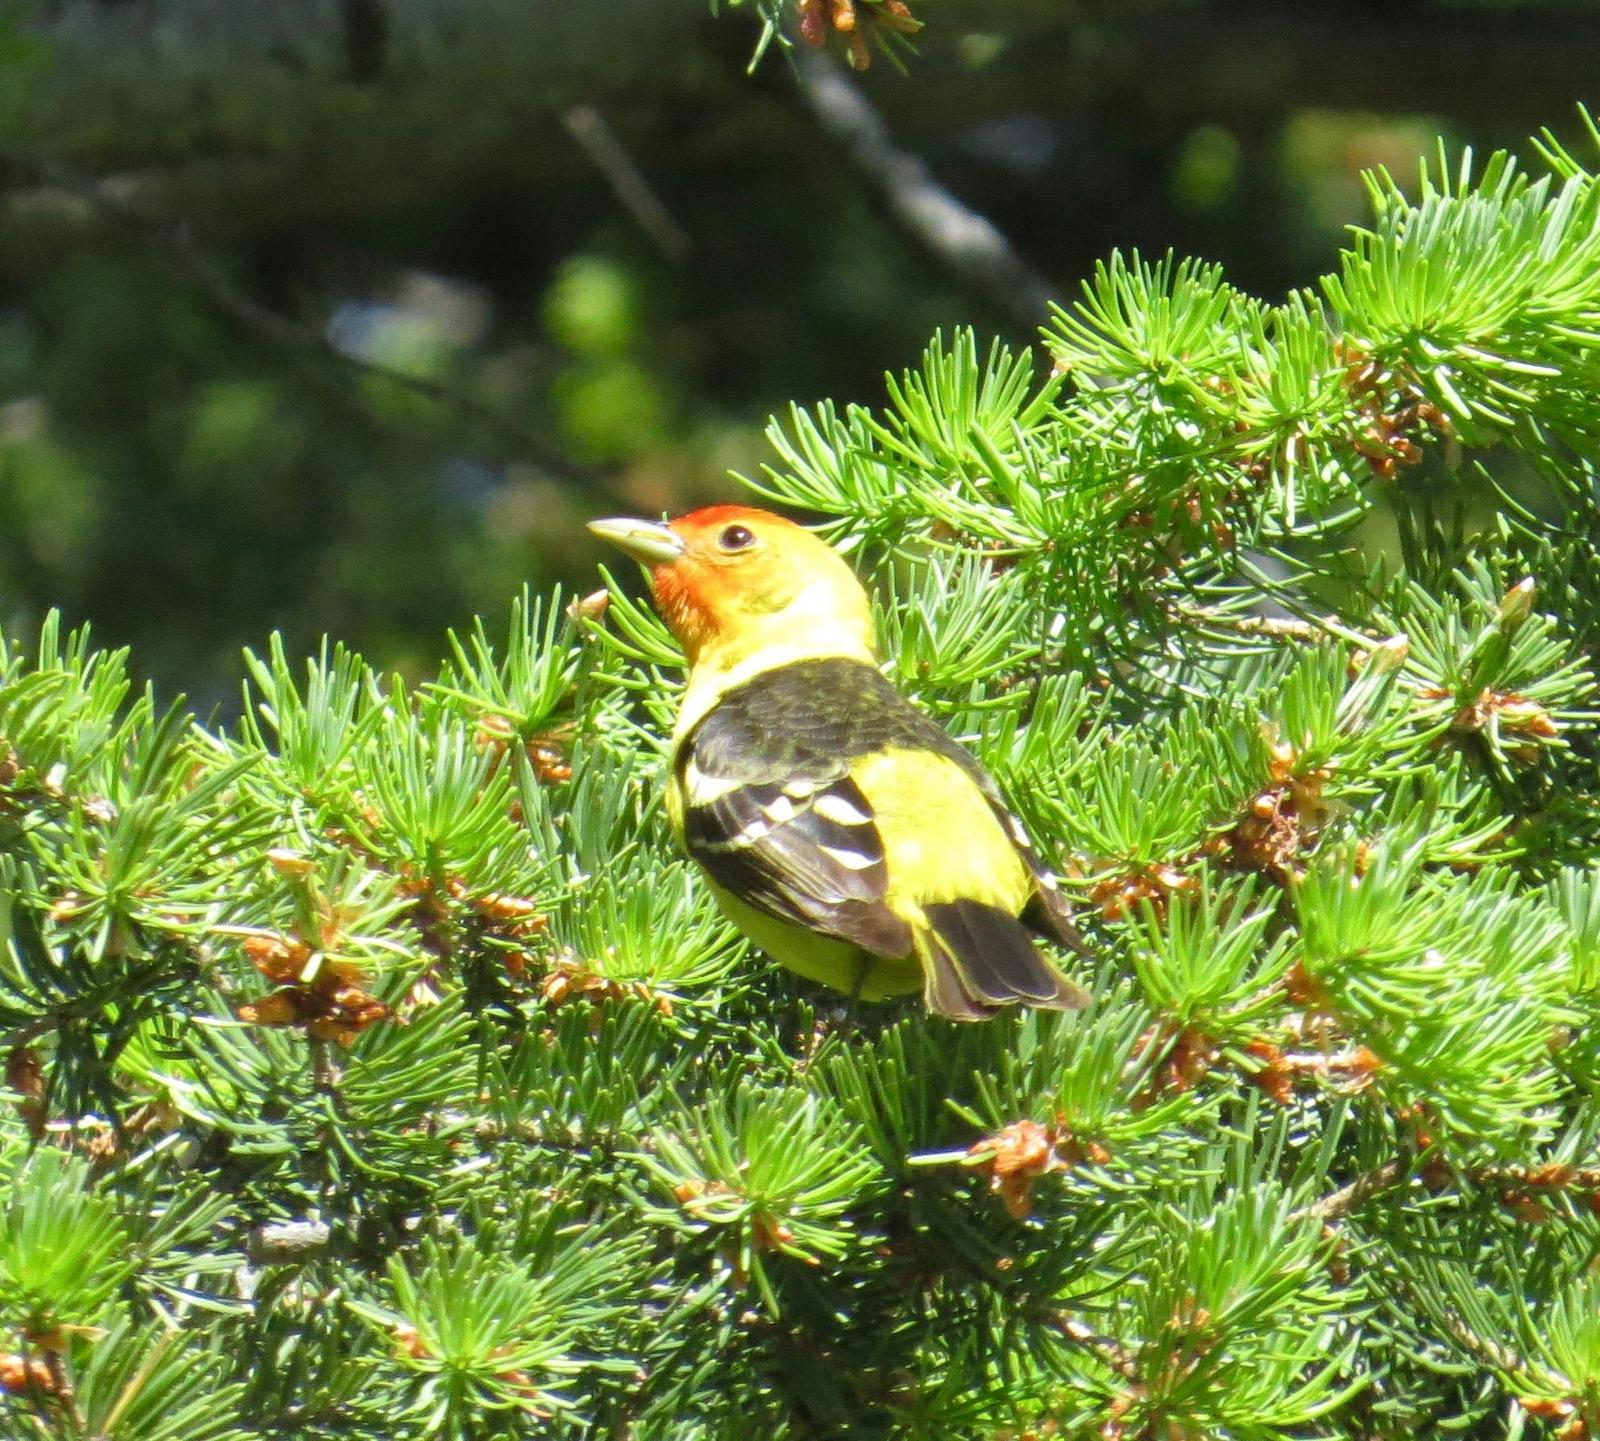 Western Tanager Photo by Don Glasco